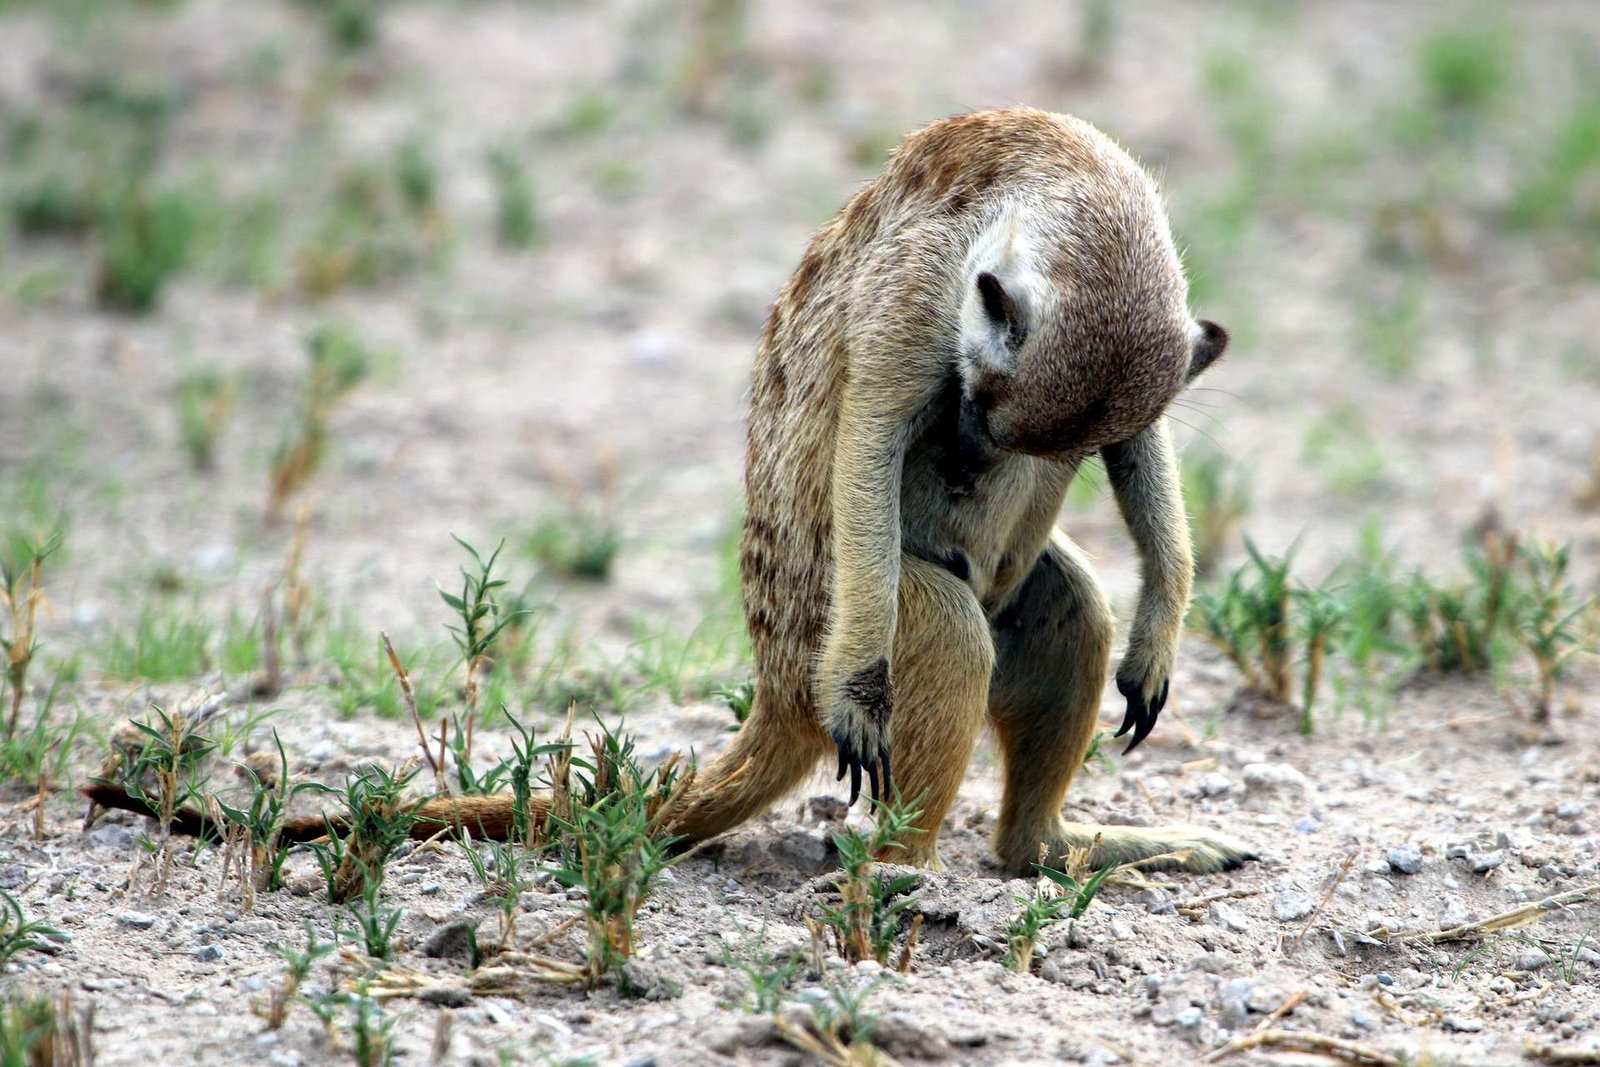 A meerkat with it's head hung low stands in a desert with tuffs of low growing grass